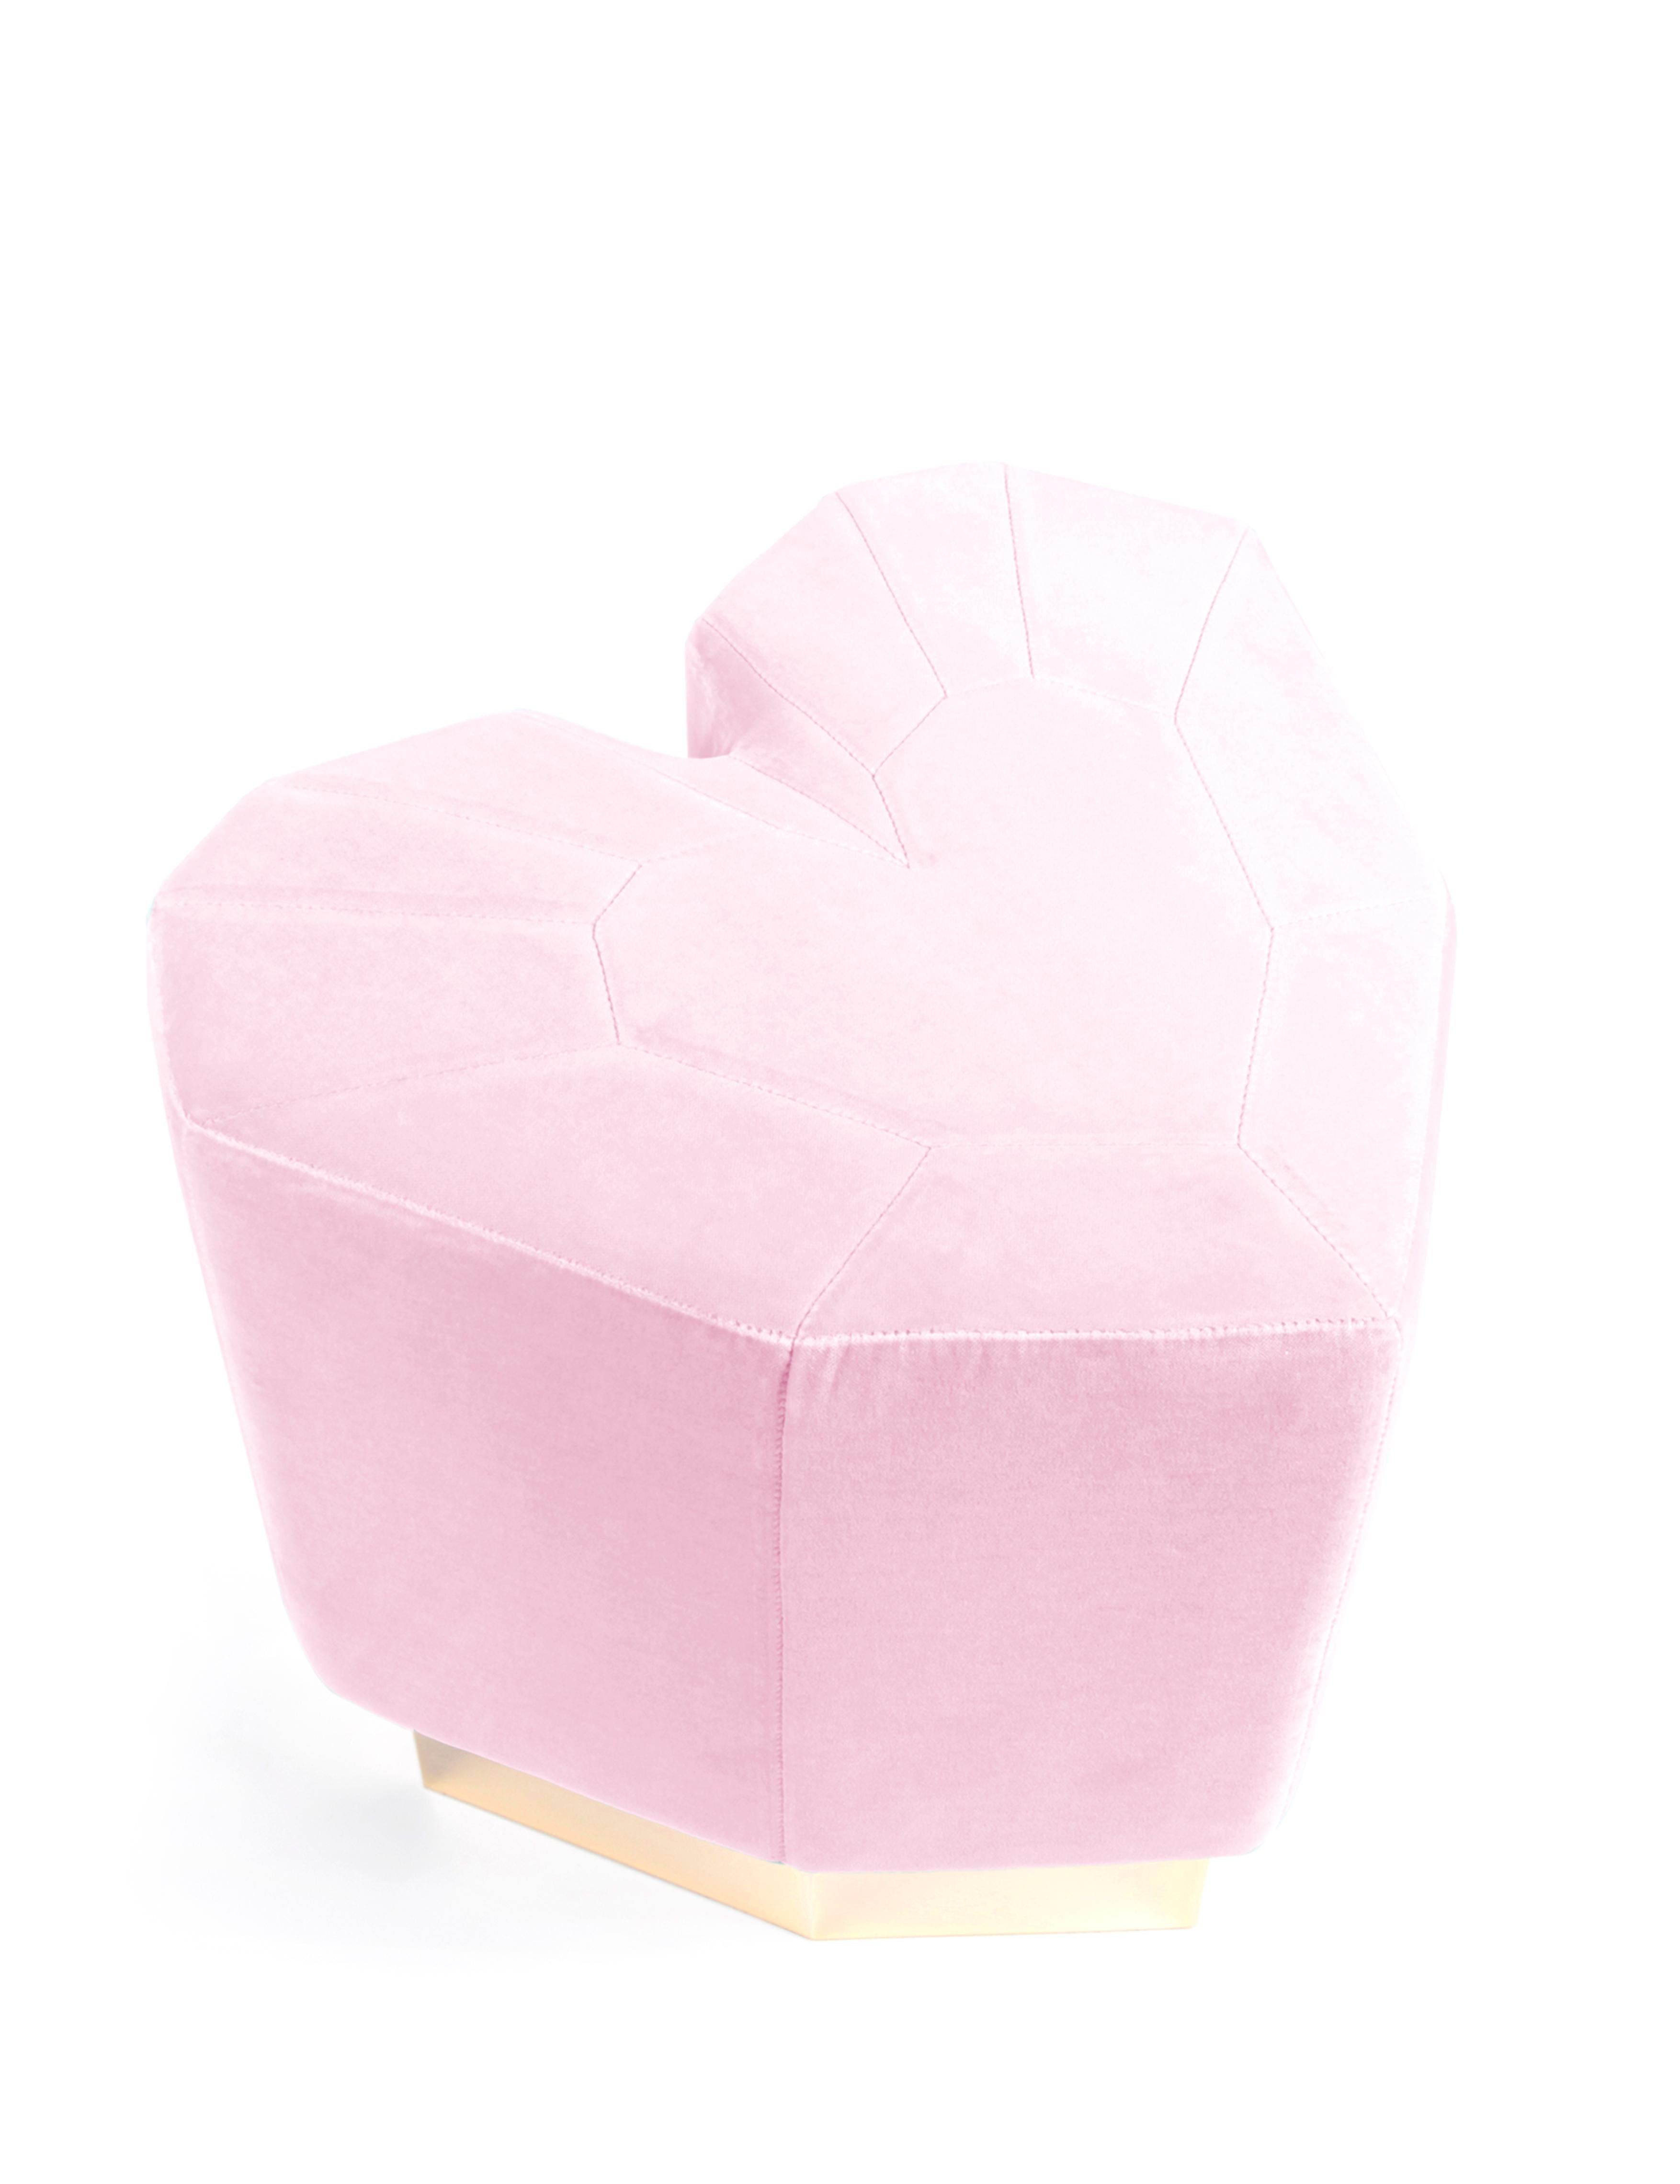 Contemporary Light Pink Queen Heart Stool by Royal Stranger For Sale